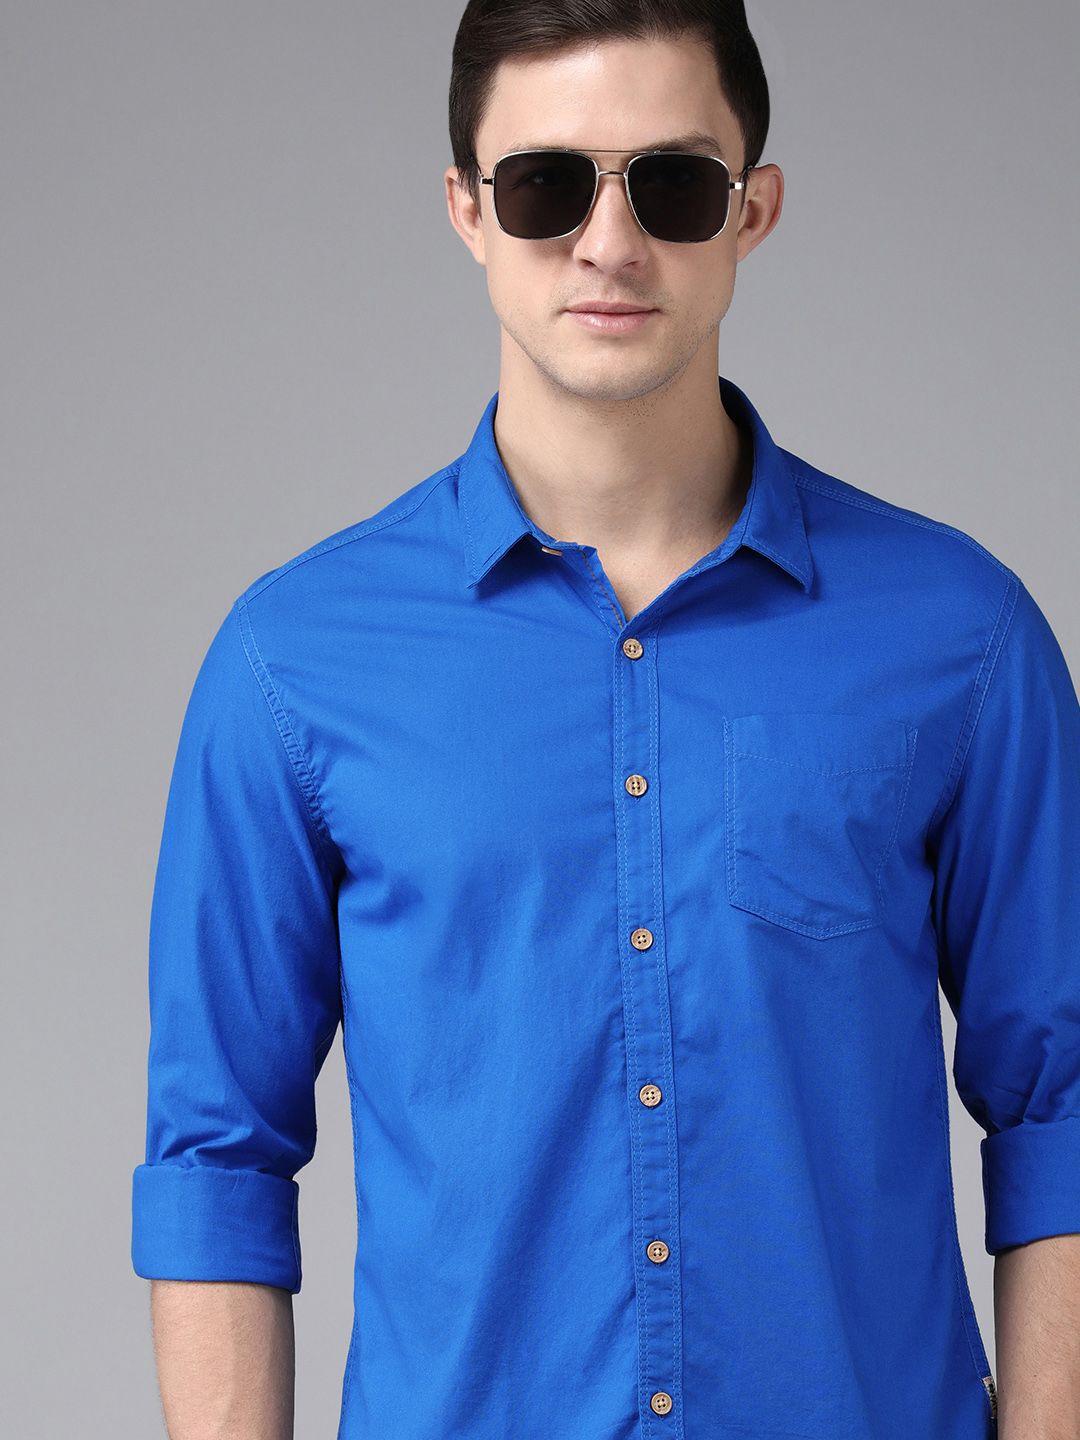 beat london by pepe jeans men blue classic slim fit casual shirt